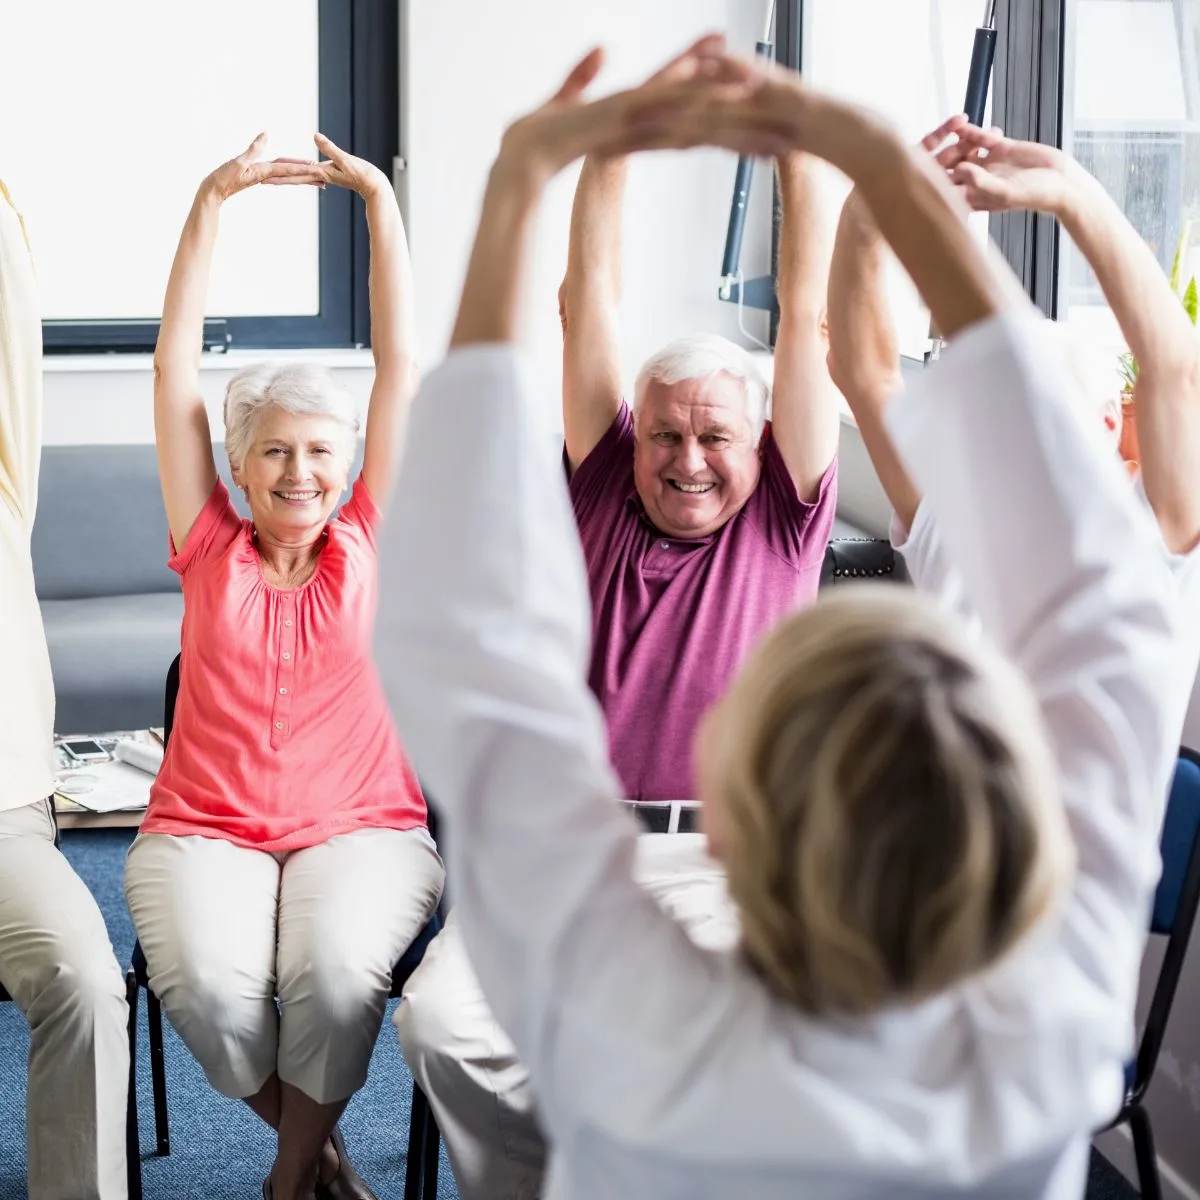 The Main Benefits of Seated Exercises for the Elderly